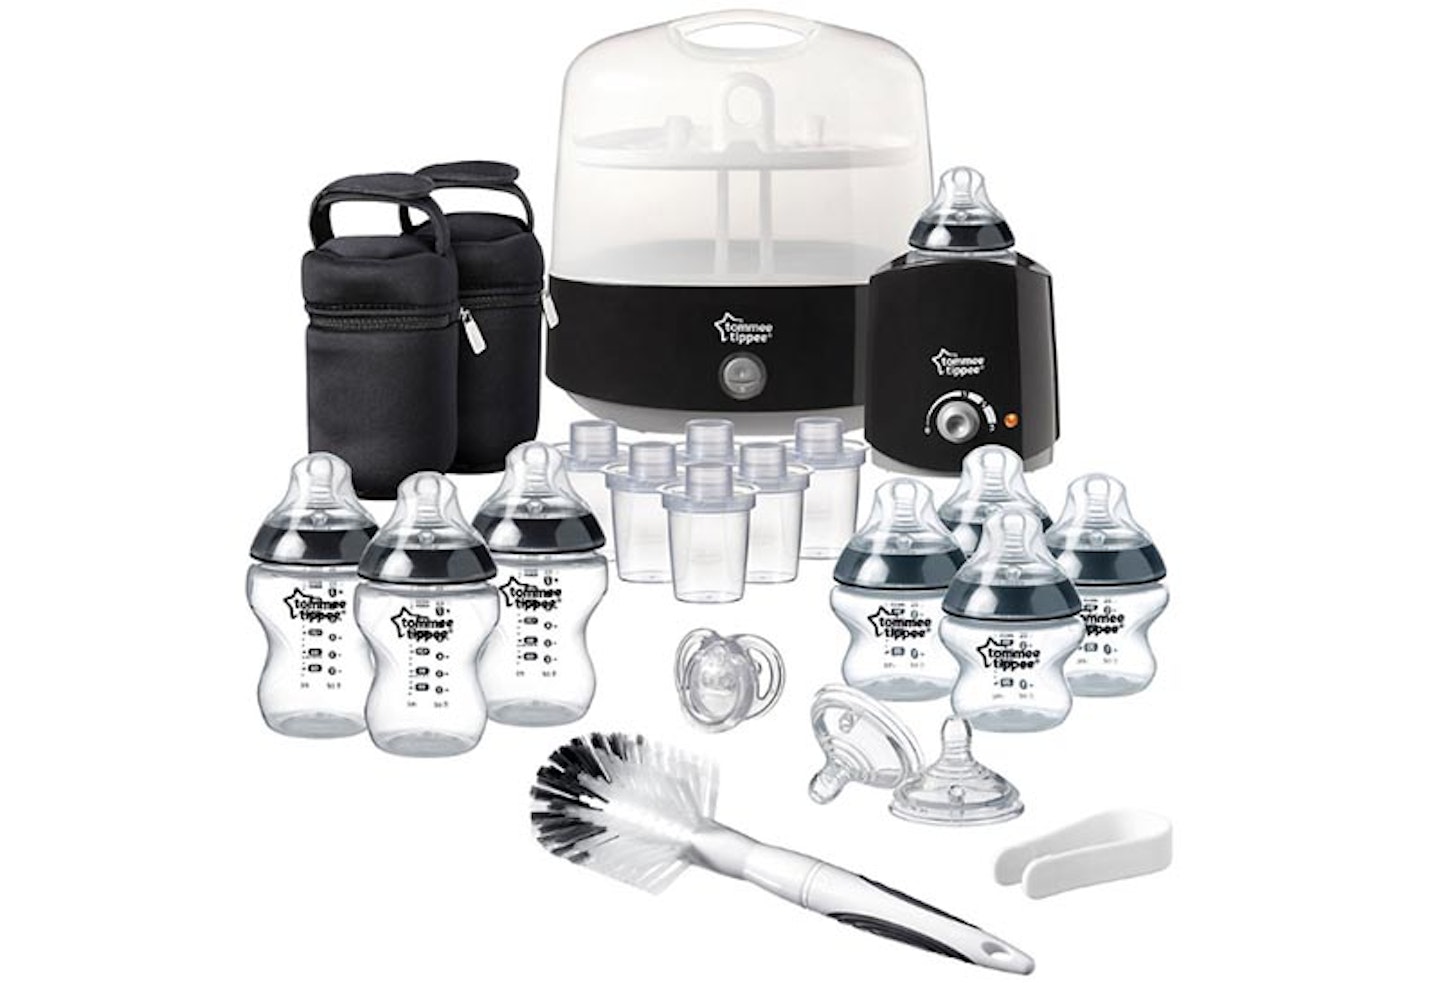 Tommee Tippee Closer to Nature Complete Feeding Set